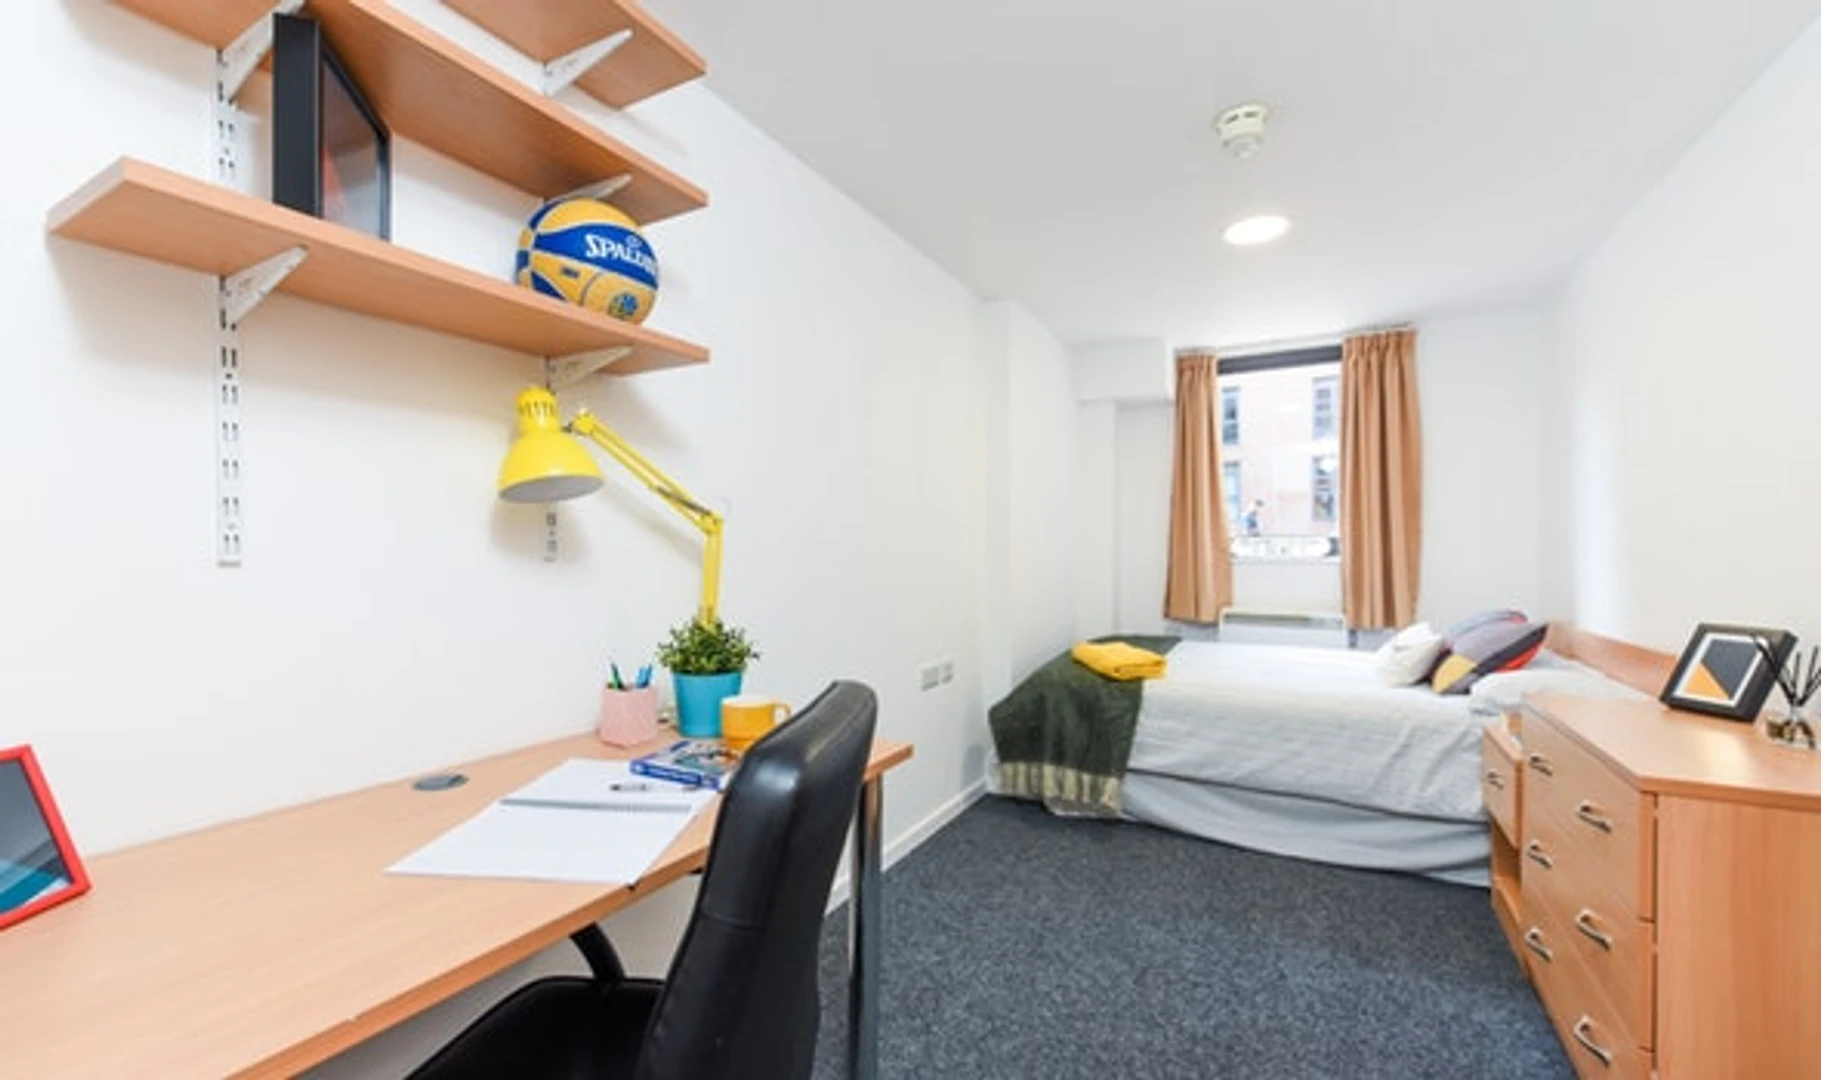 Accommodation in the centre of Sheffield